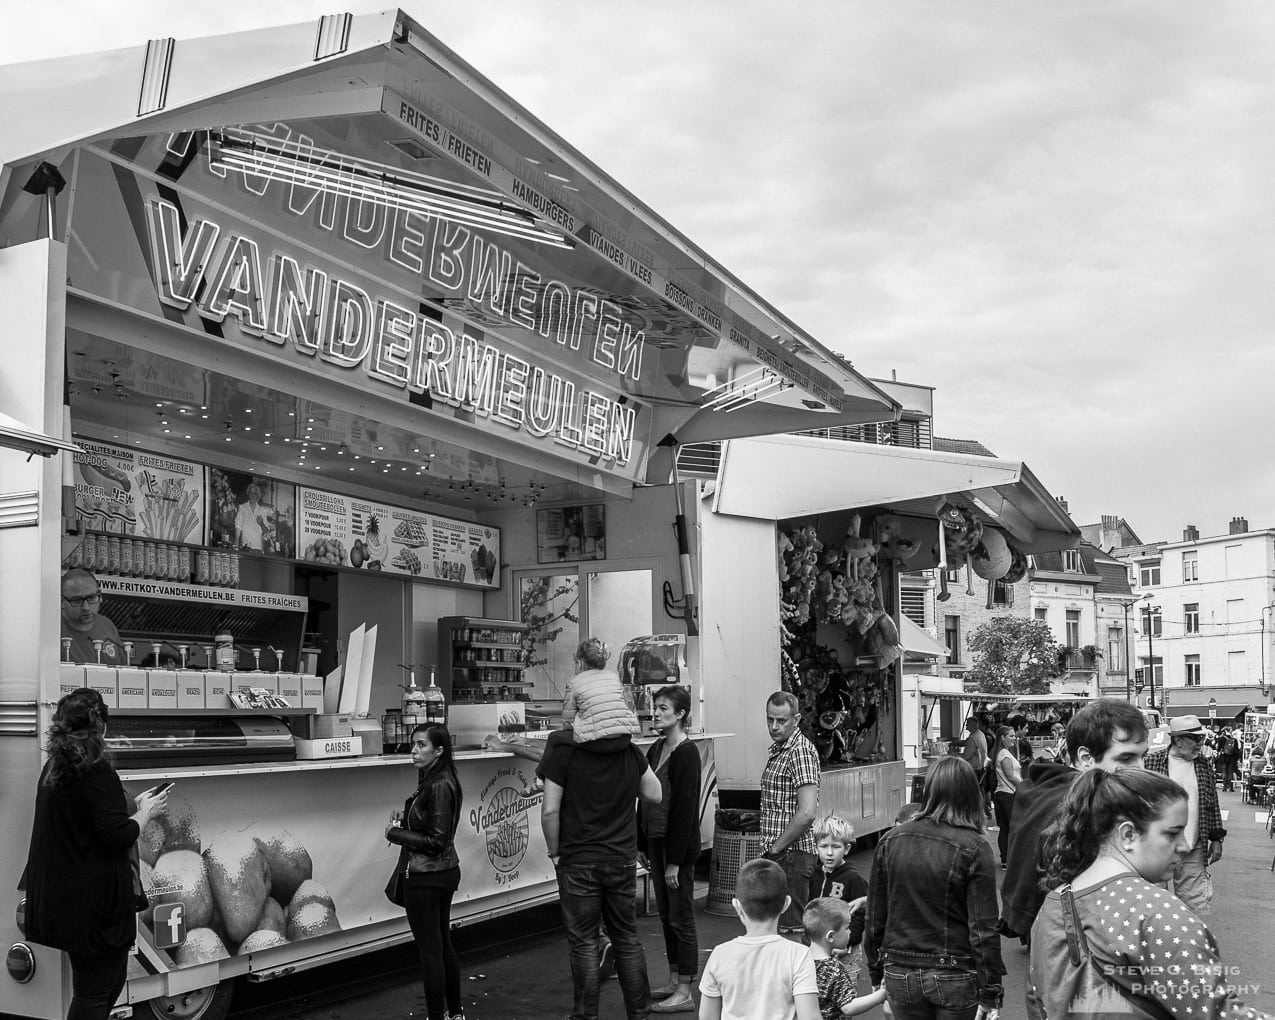 Photo 7/32 of a series of black and white photographs from the 2018 Grande Braderie D'Ixelles sidewalk sale and street festival in Brussels, Belgium.